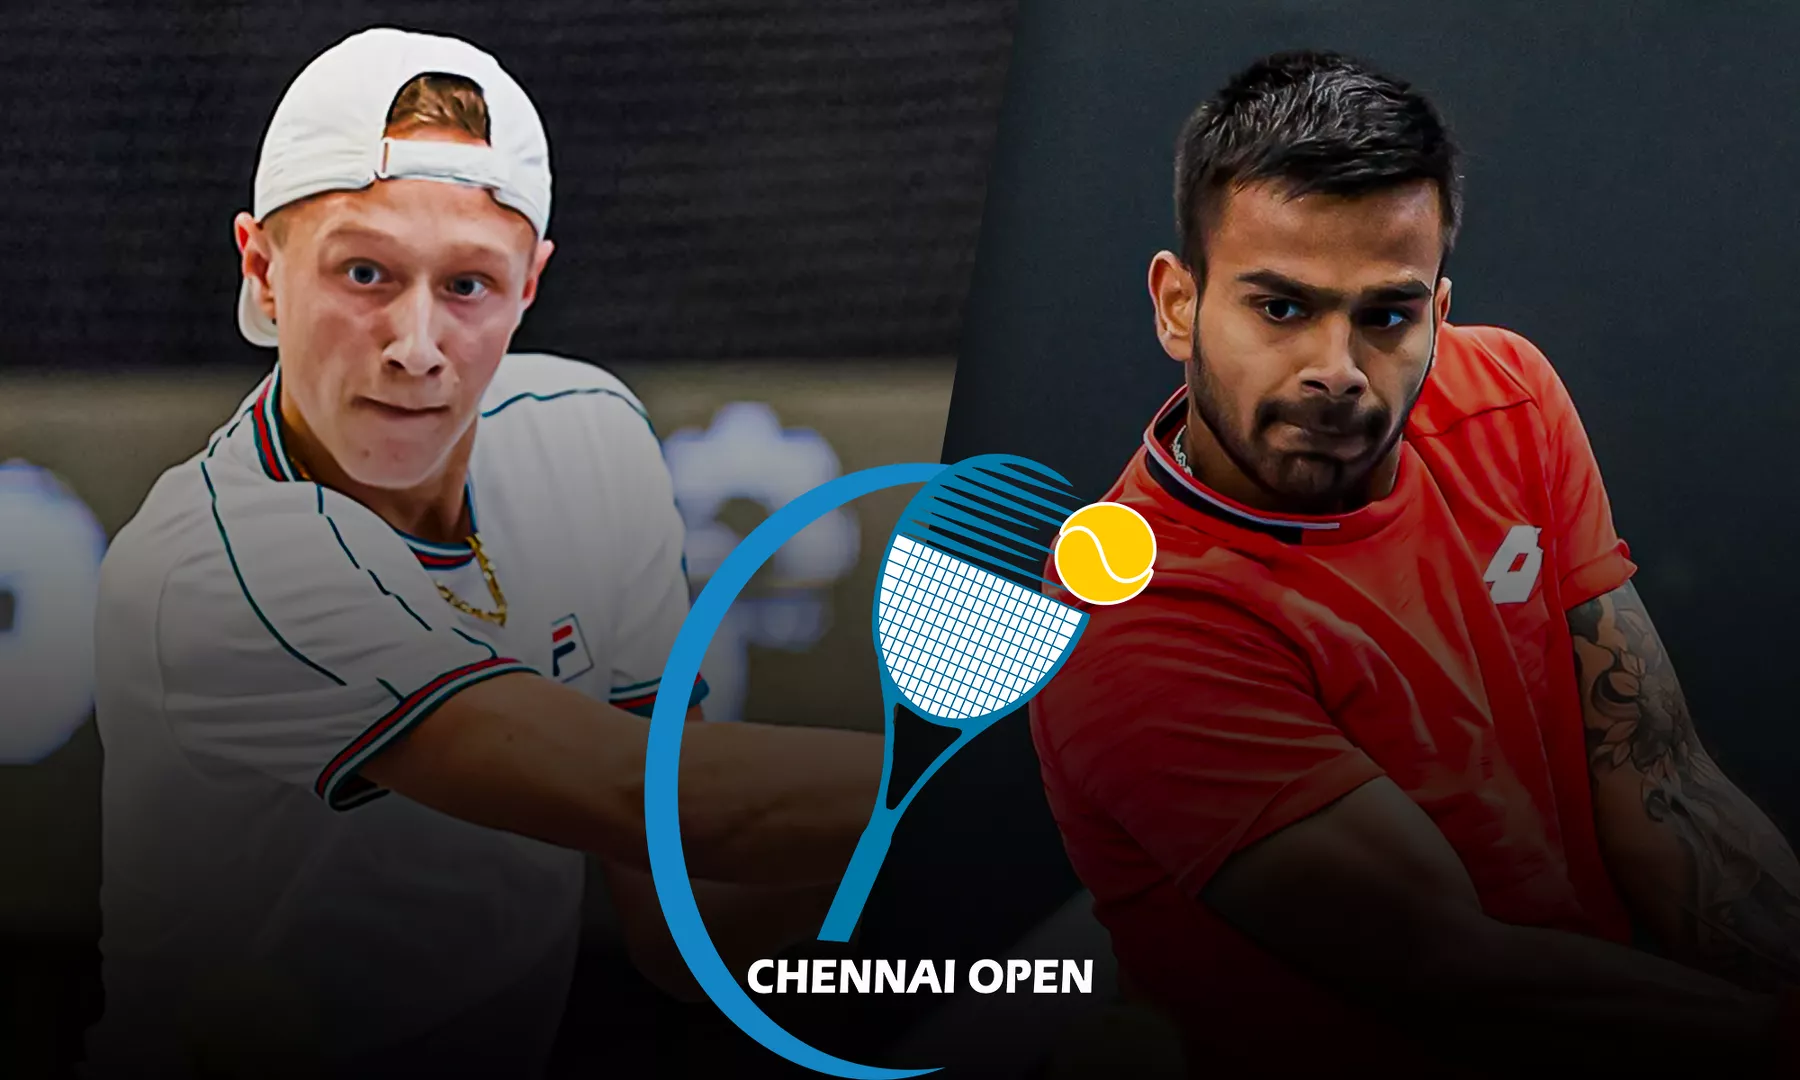 Chennai Open 2023 Challenger Full schedule, fixtures, results and live streaming details